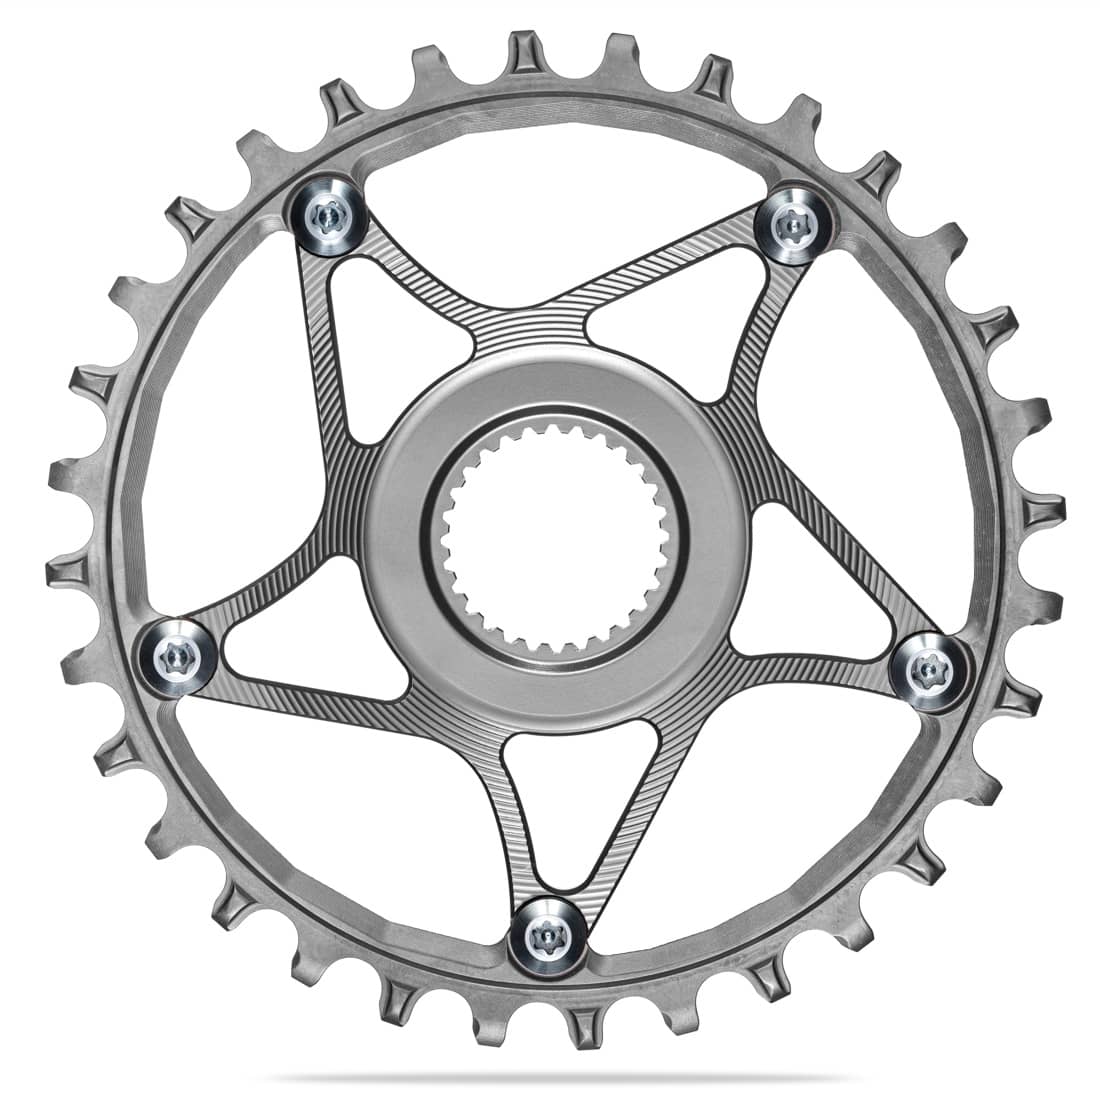 absoluteBLACK: We have Proven OVAL chainrings. More Performance 